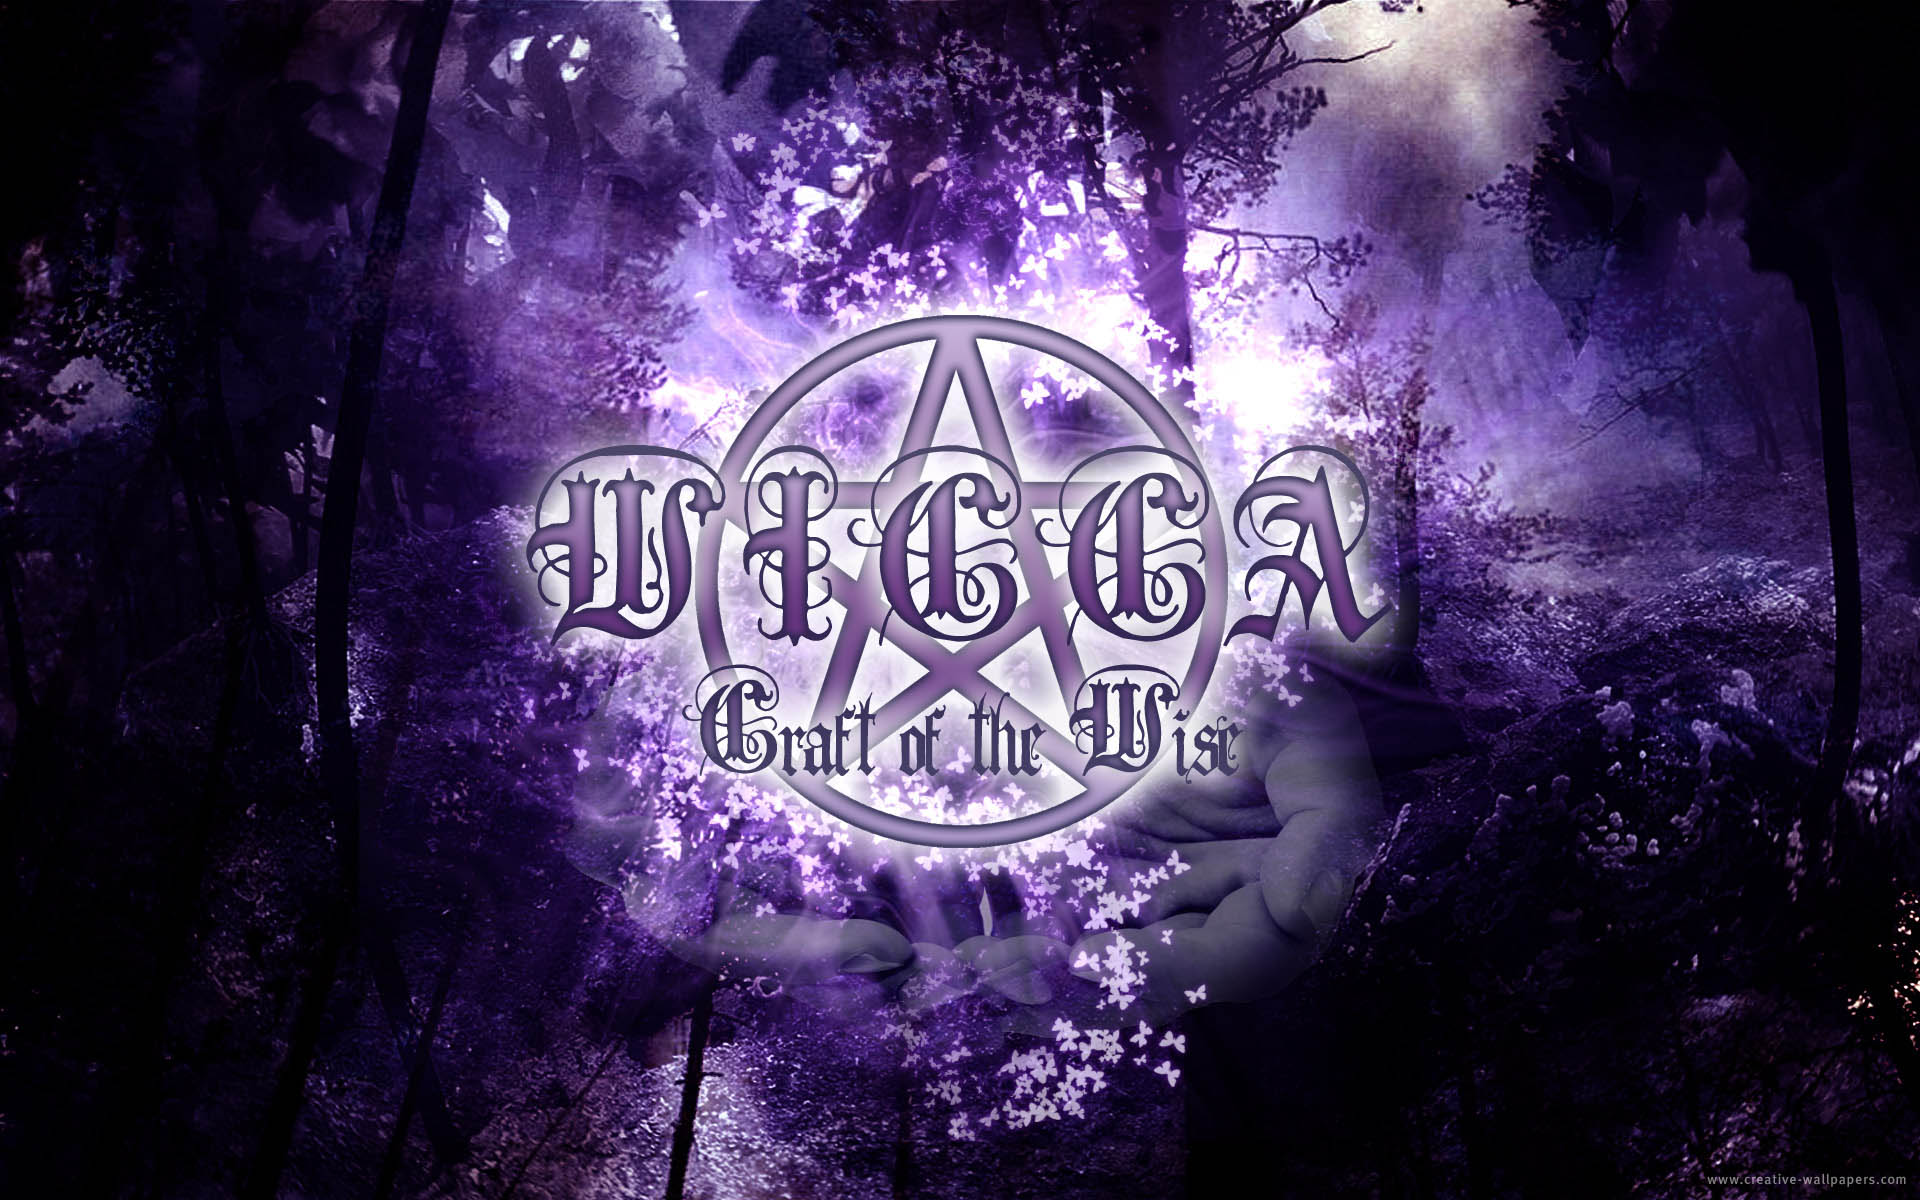 Wicca   Desktop Backgrounds from us at Creative Wallpapers 1920x1200